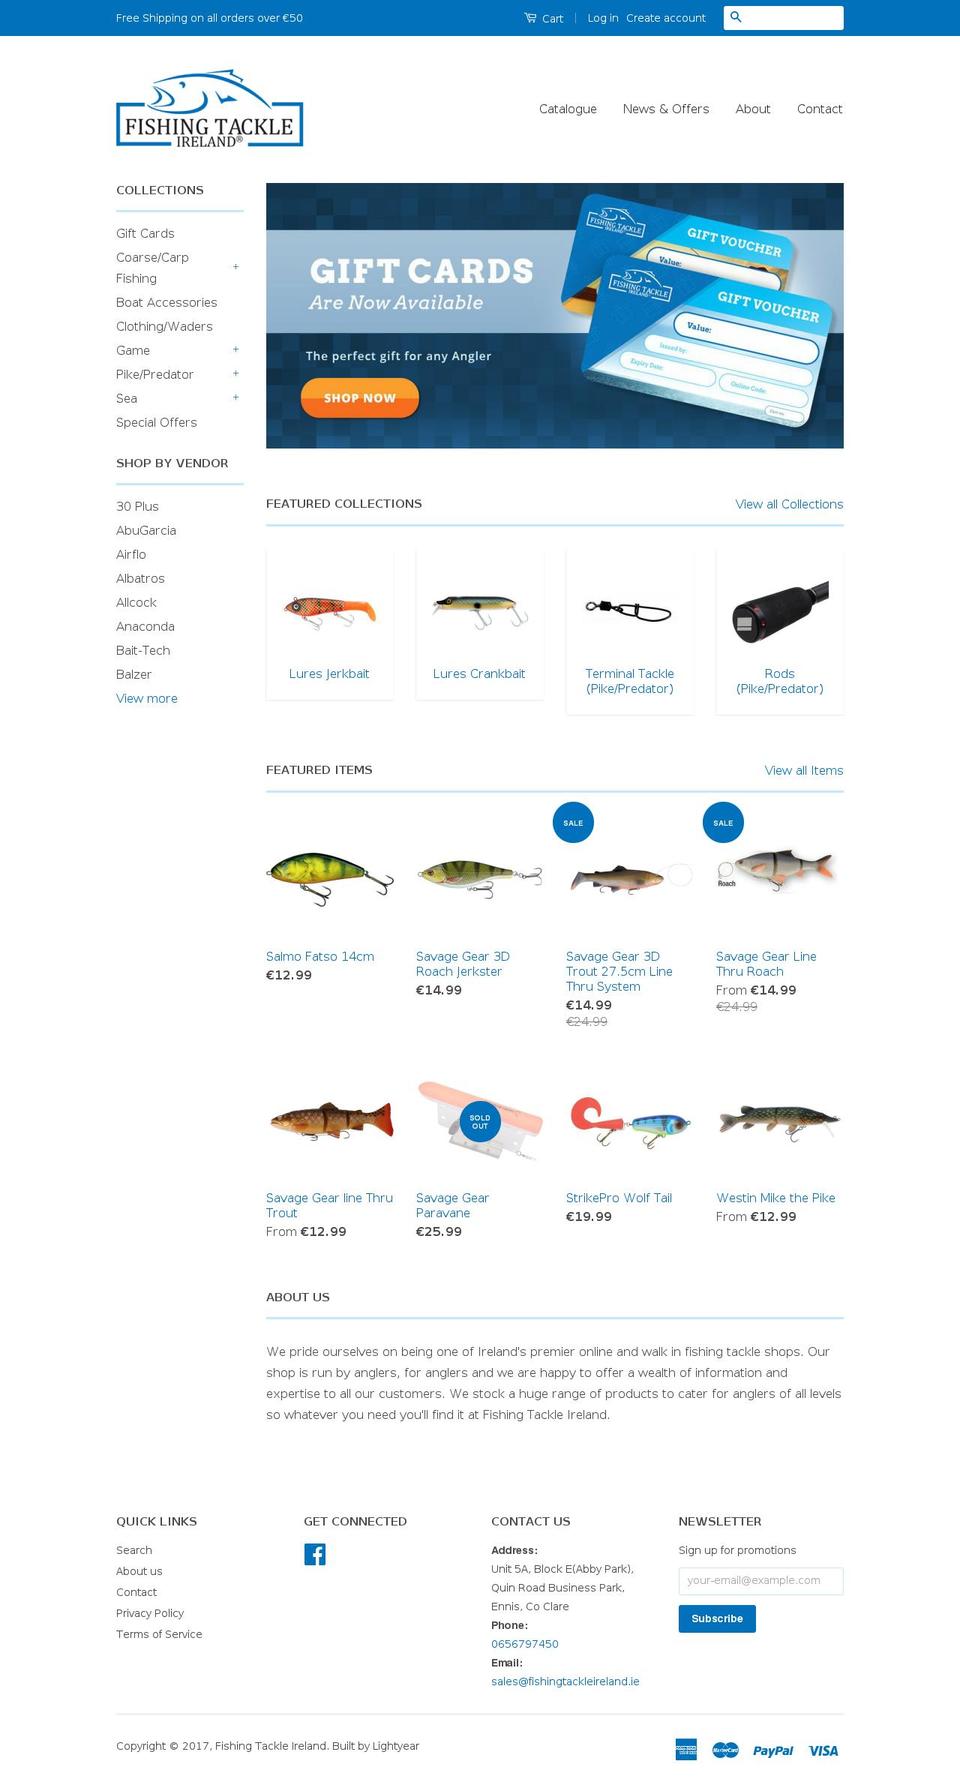 classic Shopify theme site example fishingtackleireland.ie